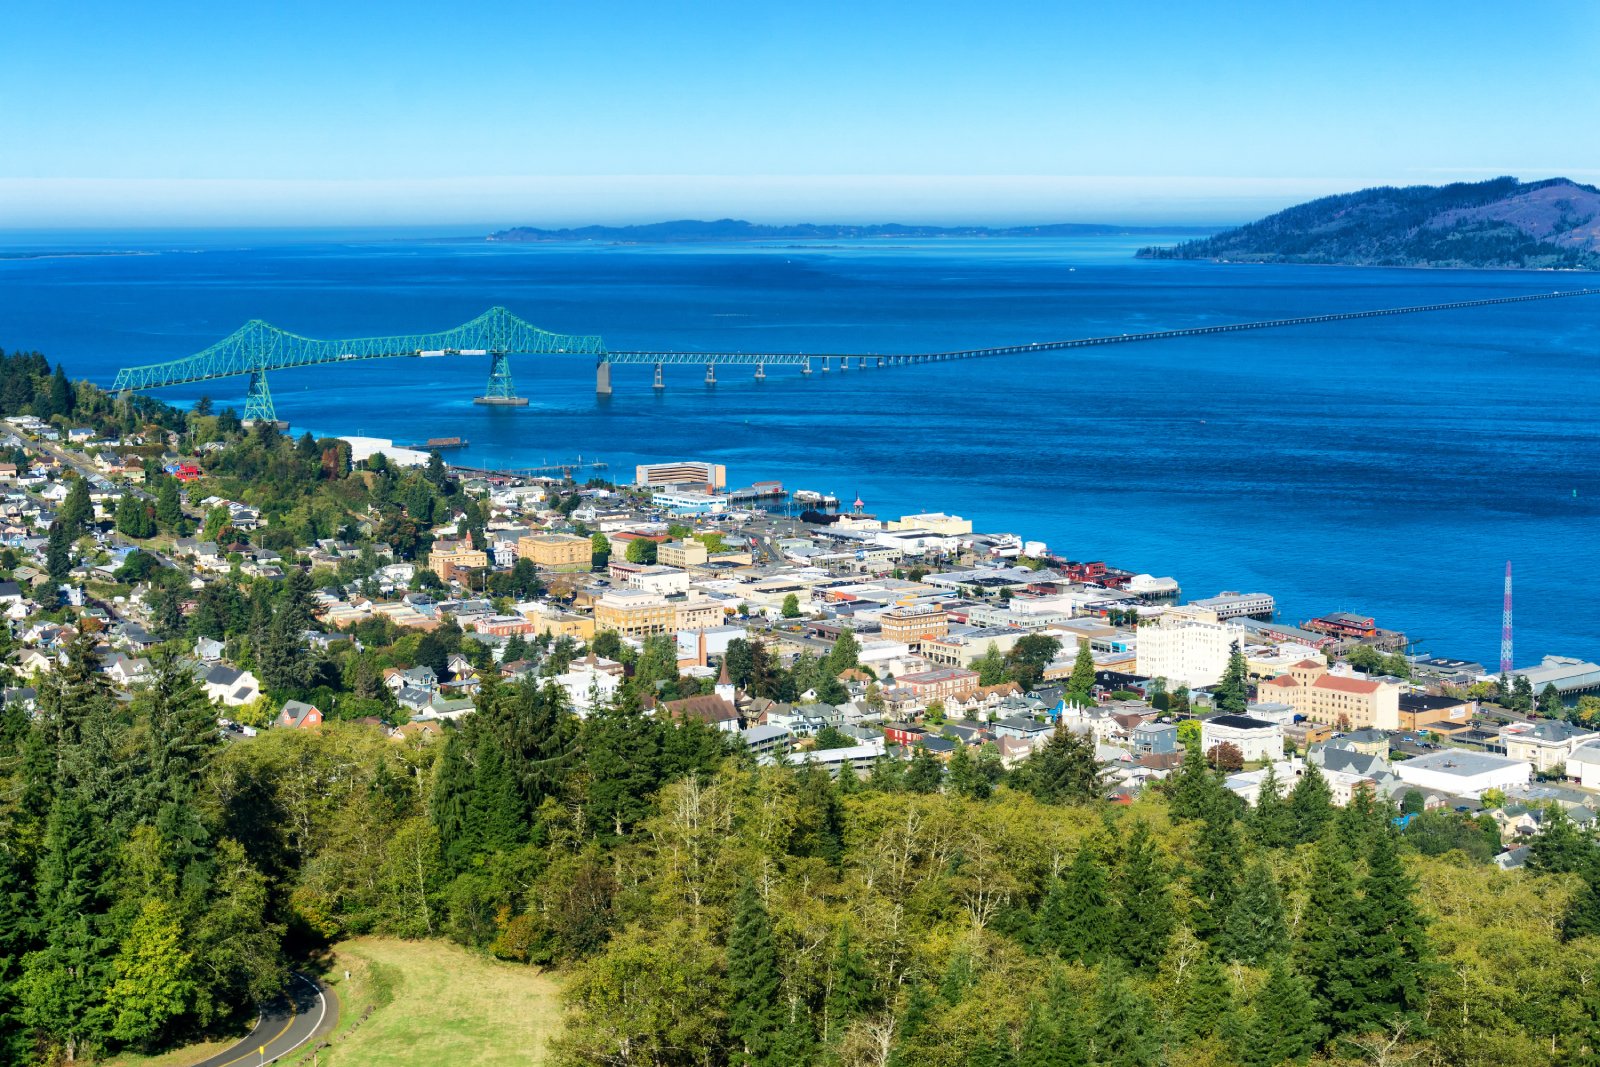 Image Credit: Shutterstock / Jess Kraft <p>Swap the bustling city for Astoria’s serene views, where the Columbia River meets the Pacific. This historic town is a haven for affordable seafood and rich maritime history without the price tag of more popular coastal cities. Enjoy the slower pace and soak in the expansive vistas.</p>